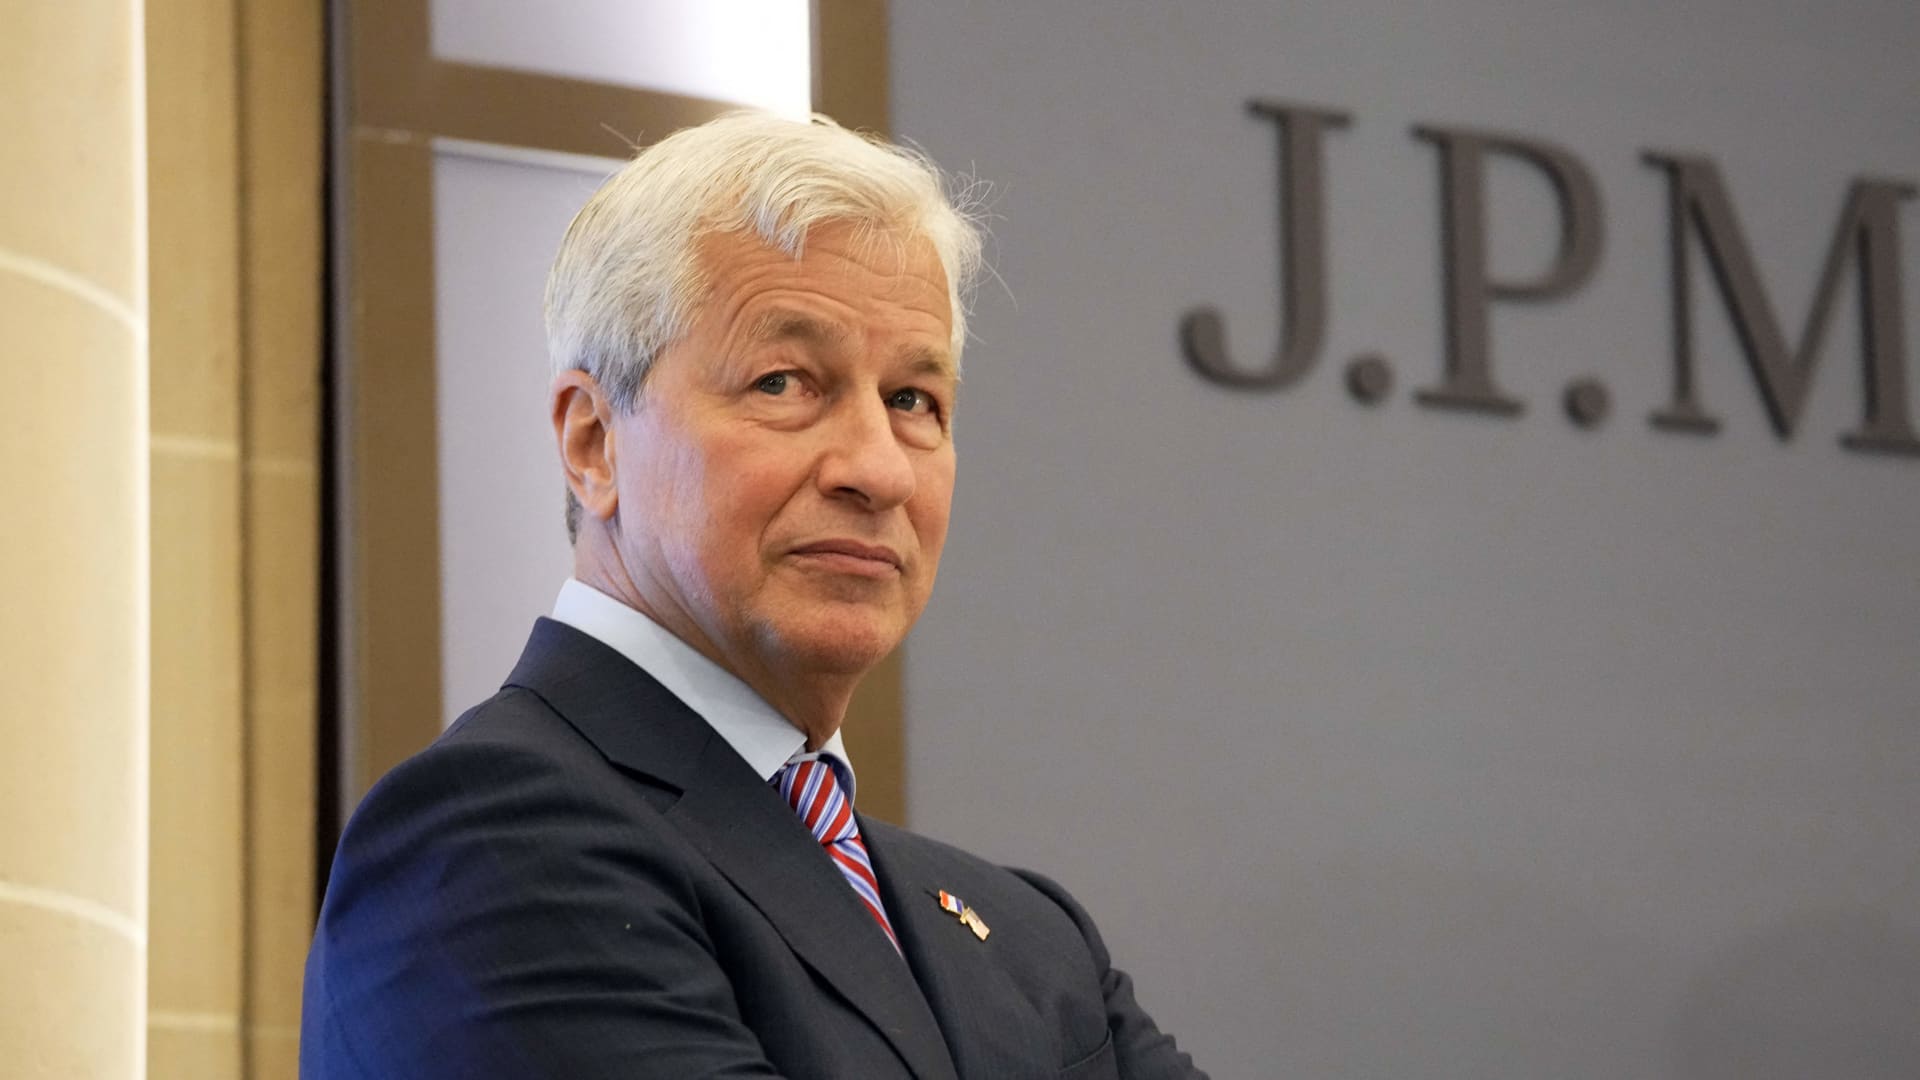 JPMorgan CEO Jamie Dimon says other bank exec could have booted Jeffrey Epstein as customer